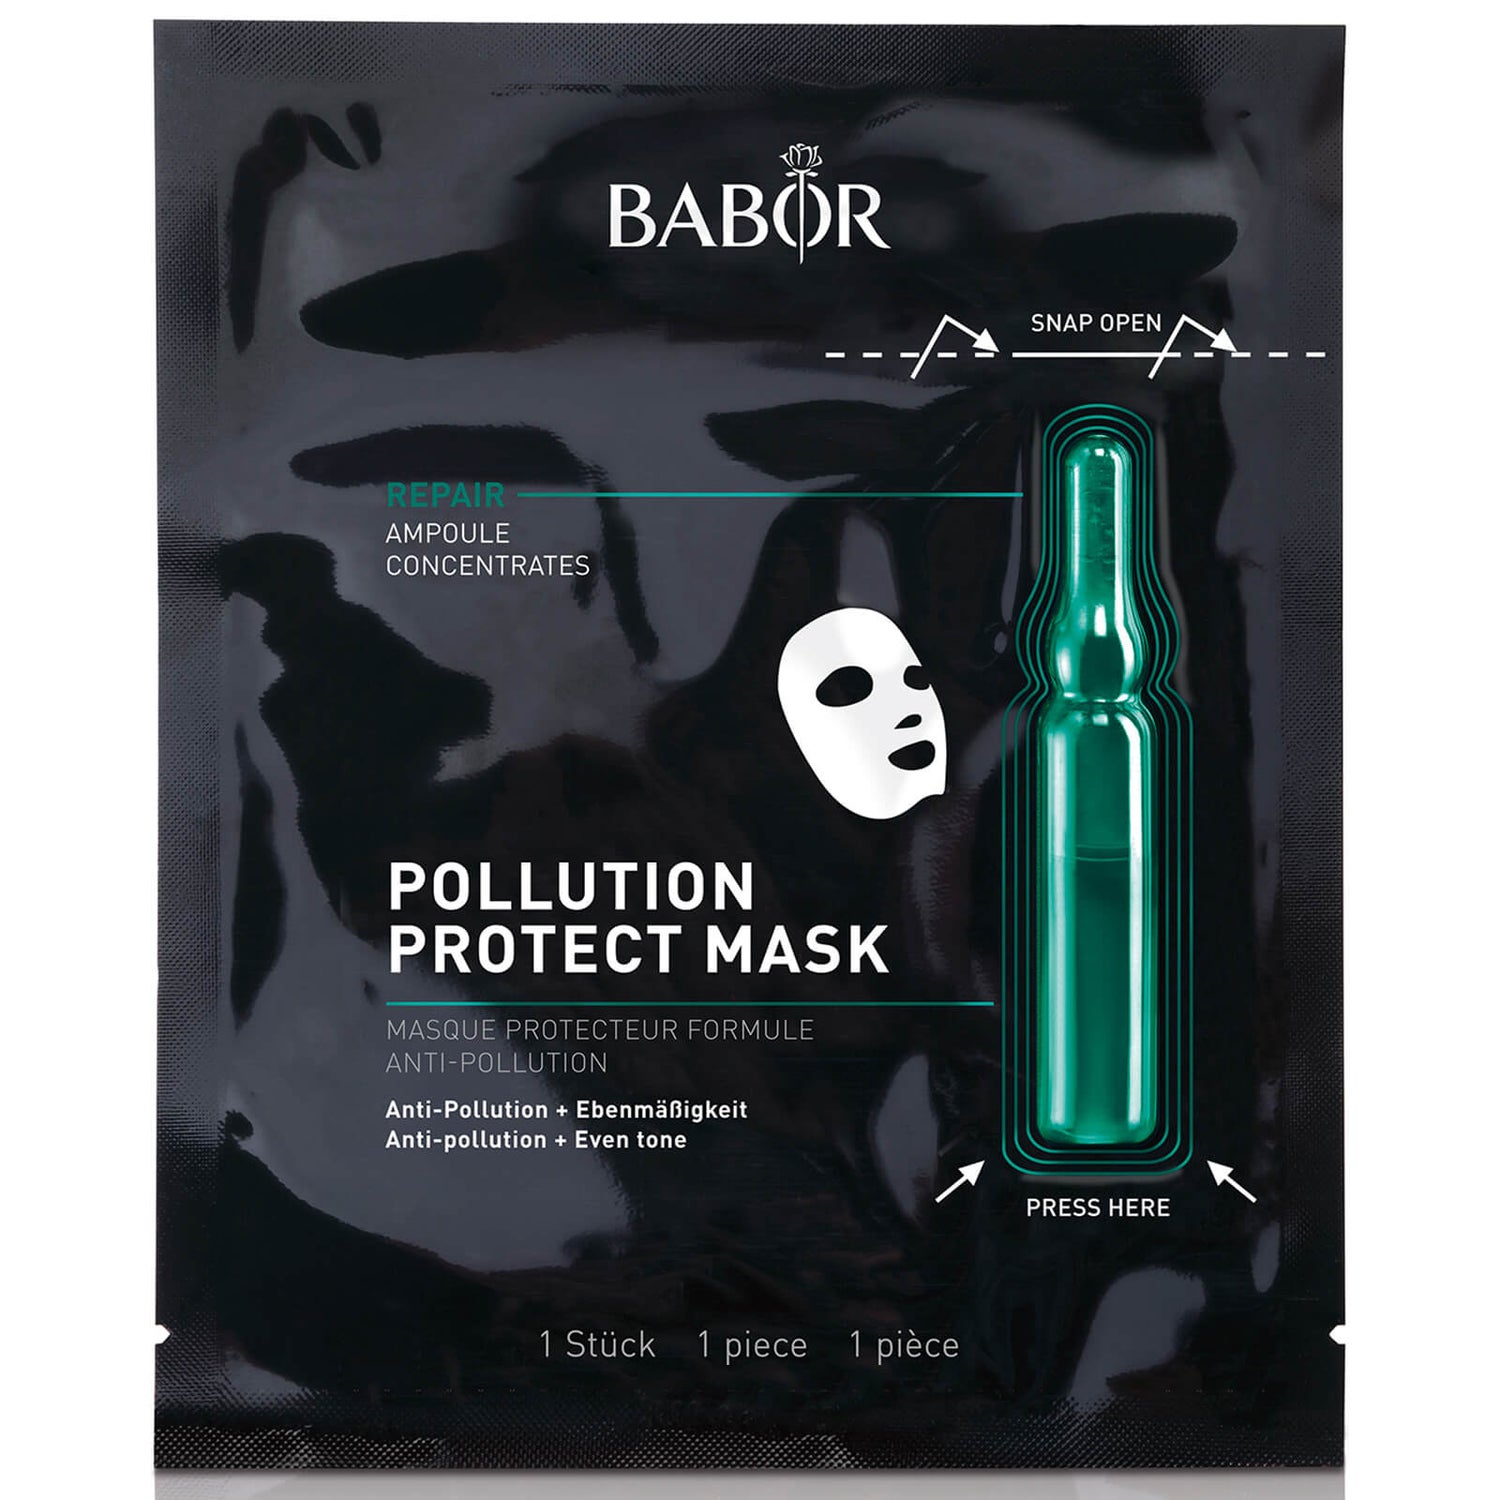 BABOR Pollution Protect Ampoule Mask 6.44 oz